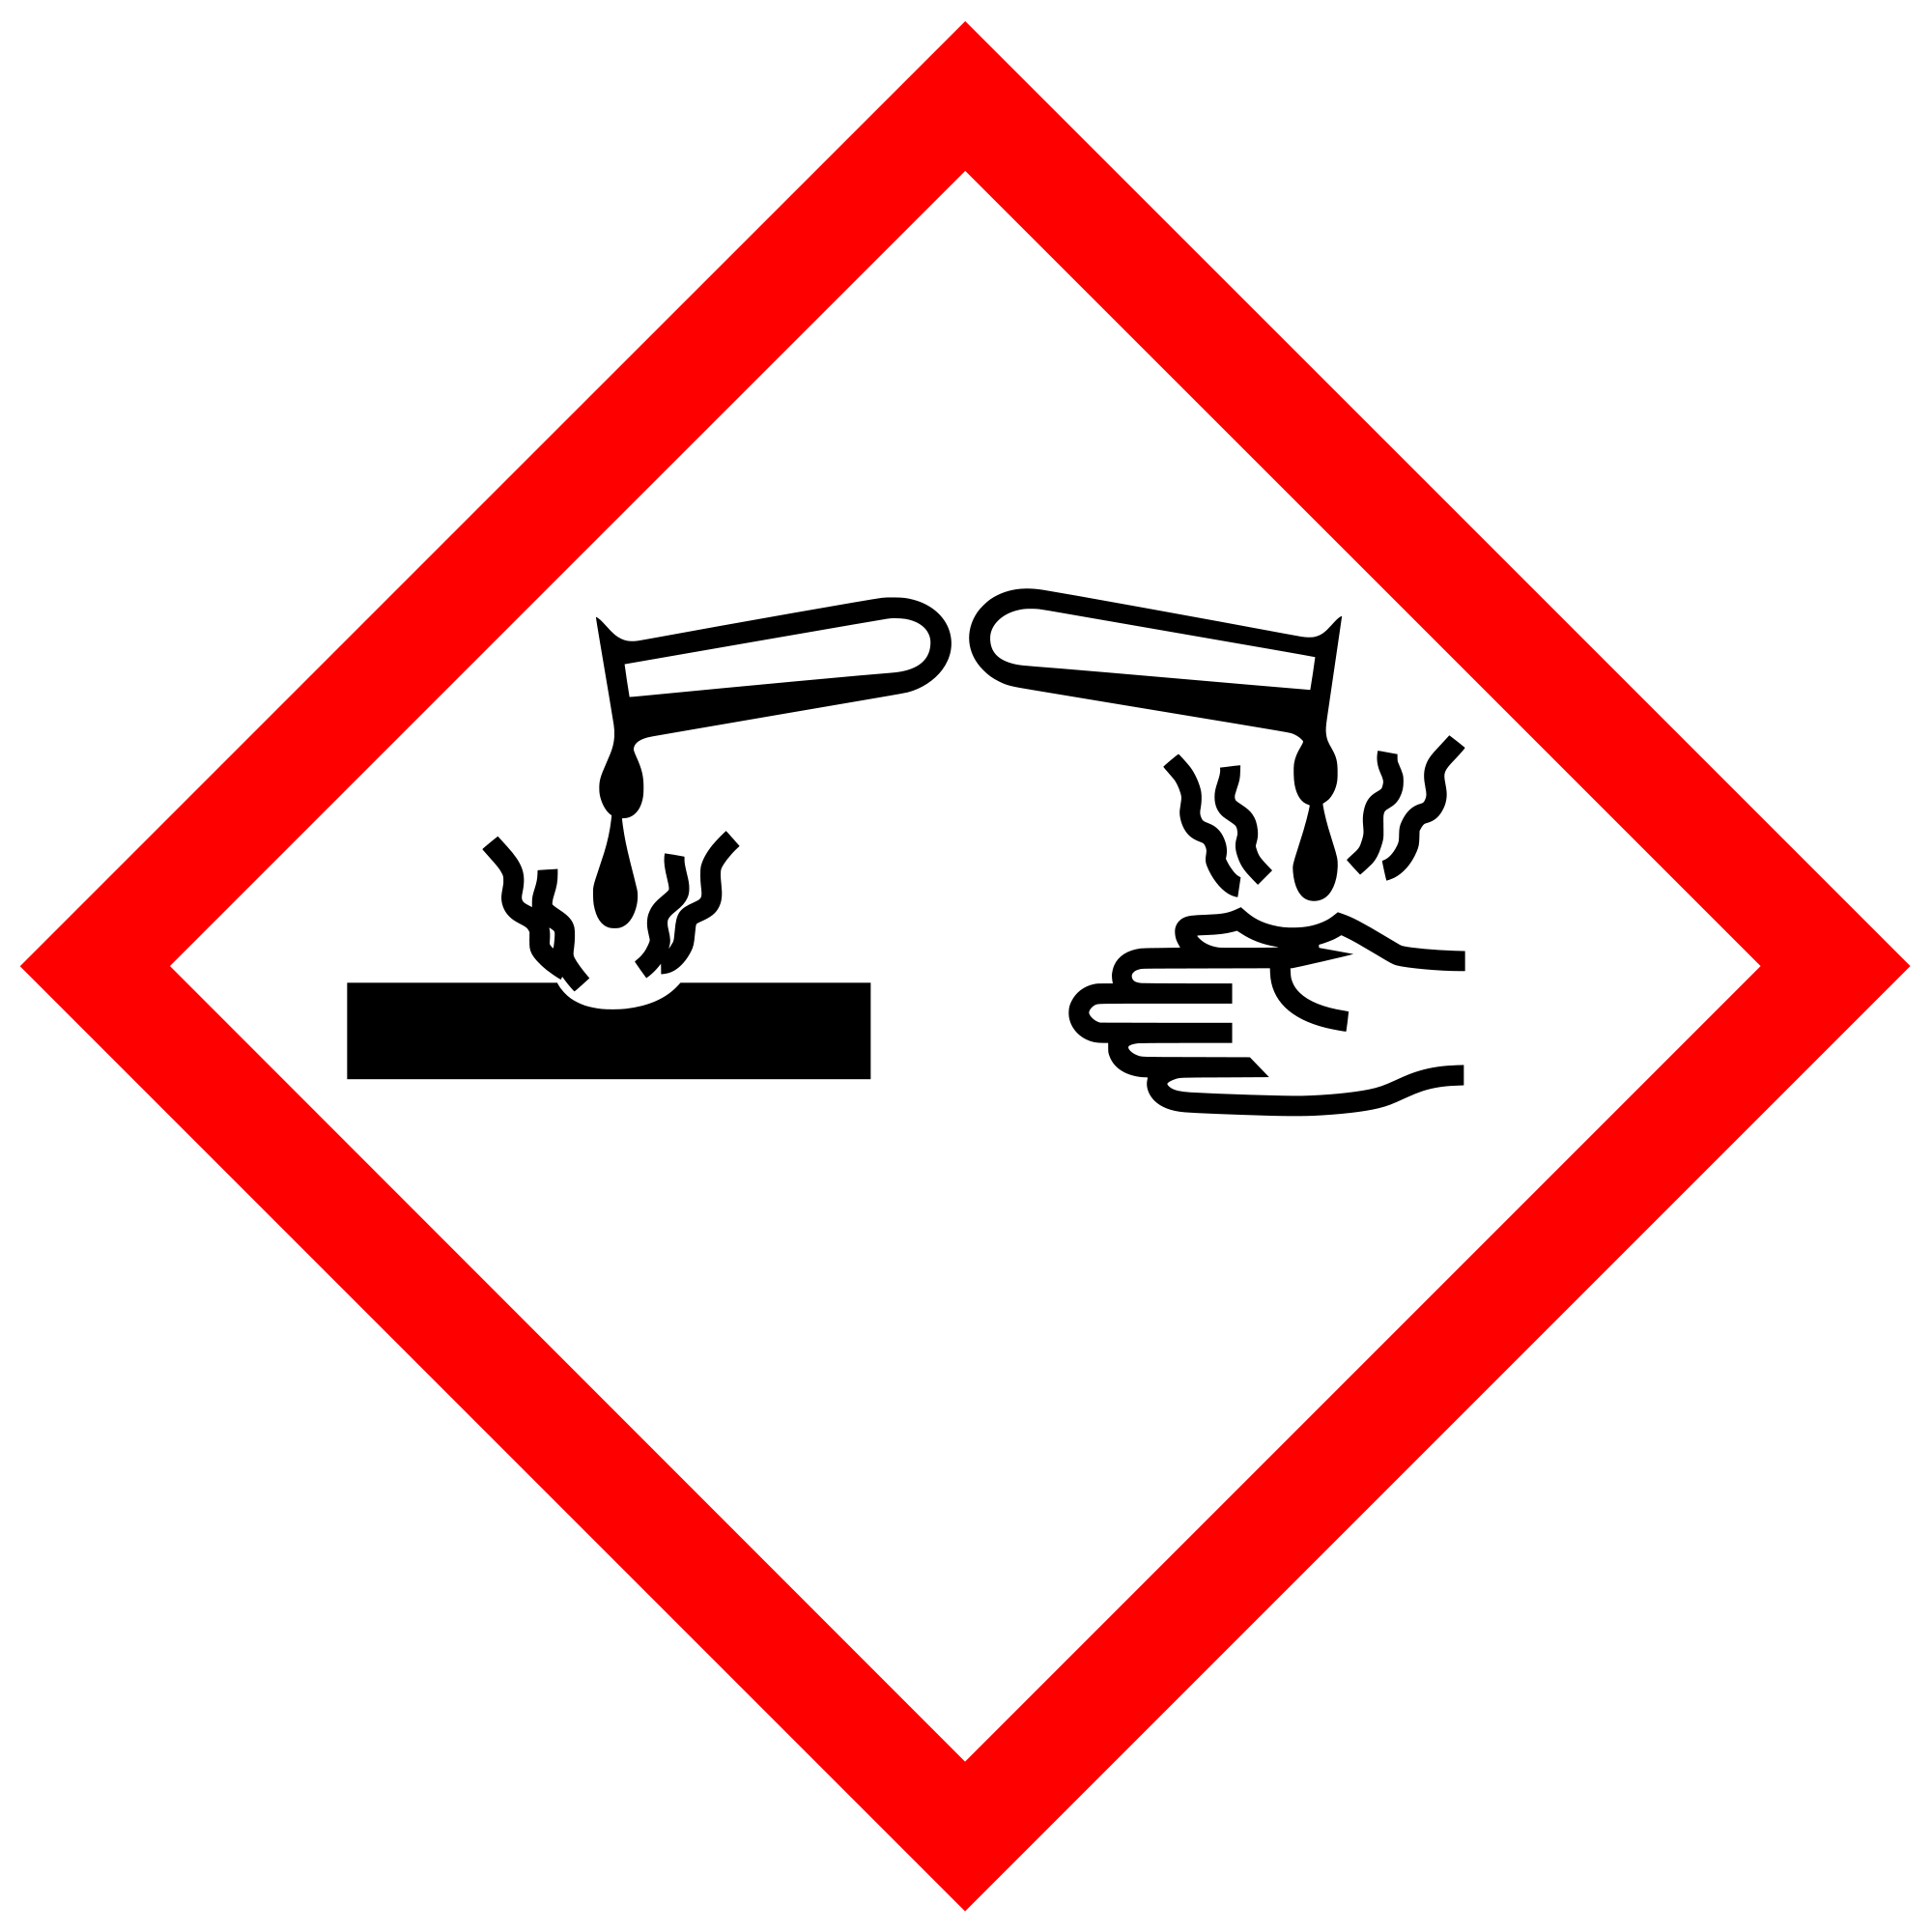 Corrosive And Flammable Signs Symbols - ClipArt Best